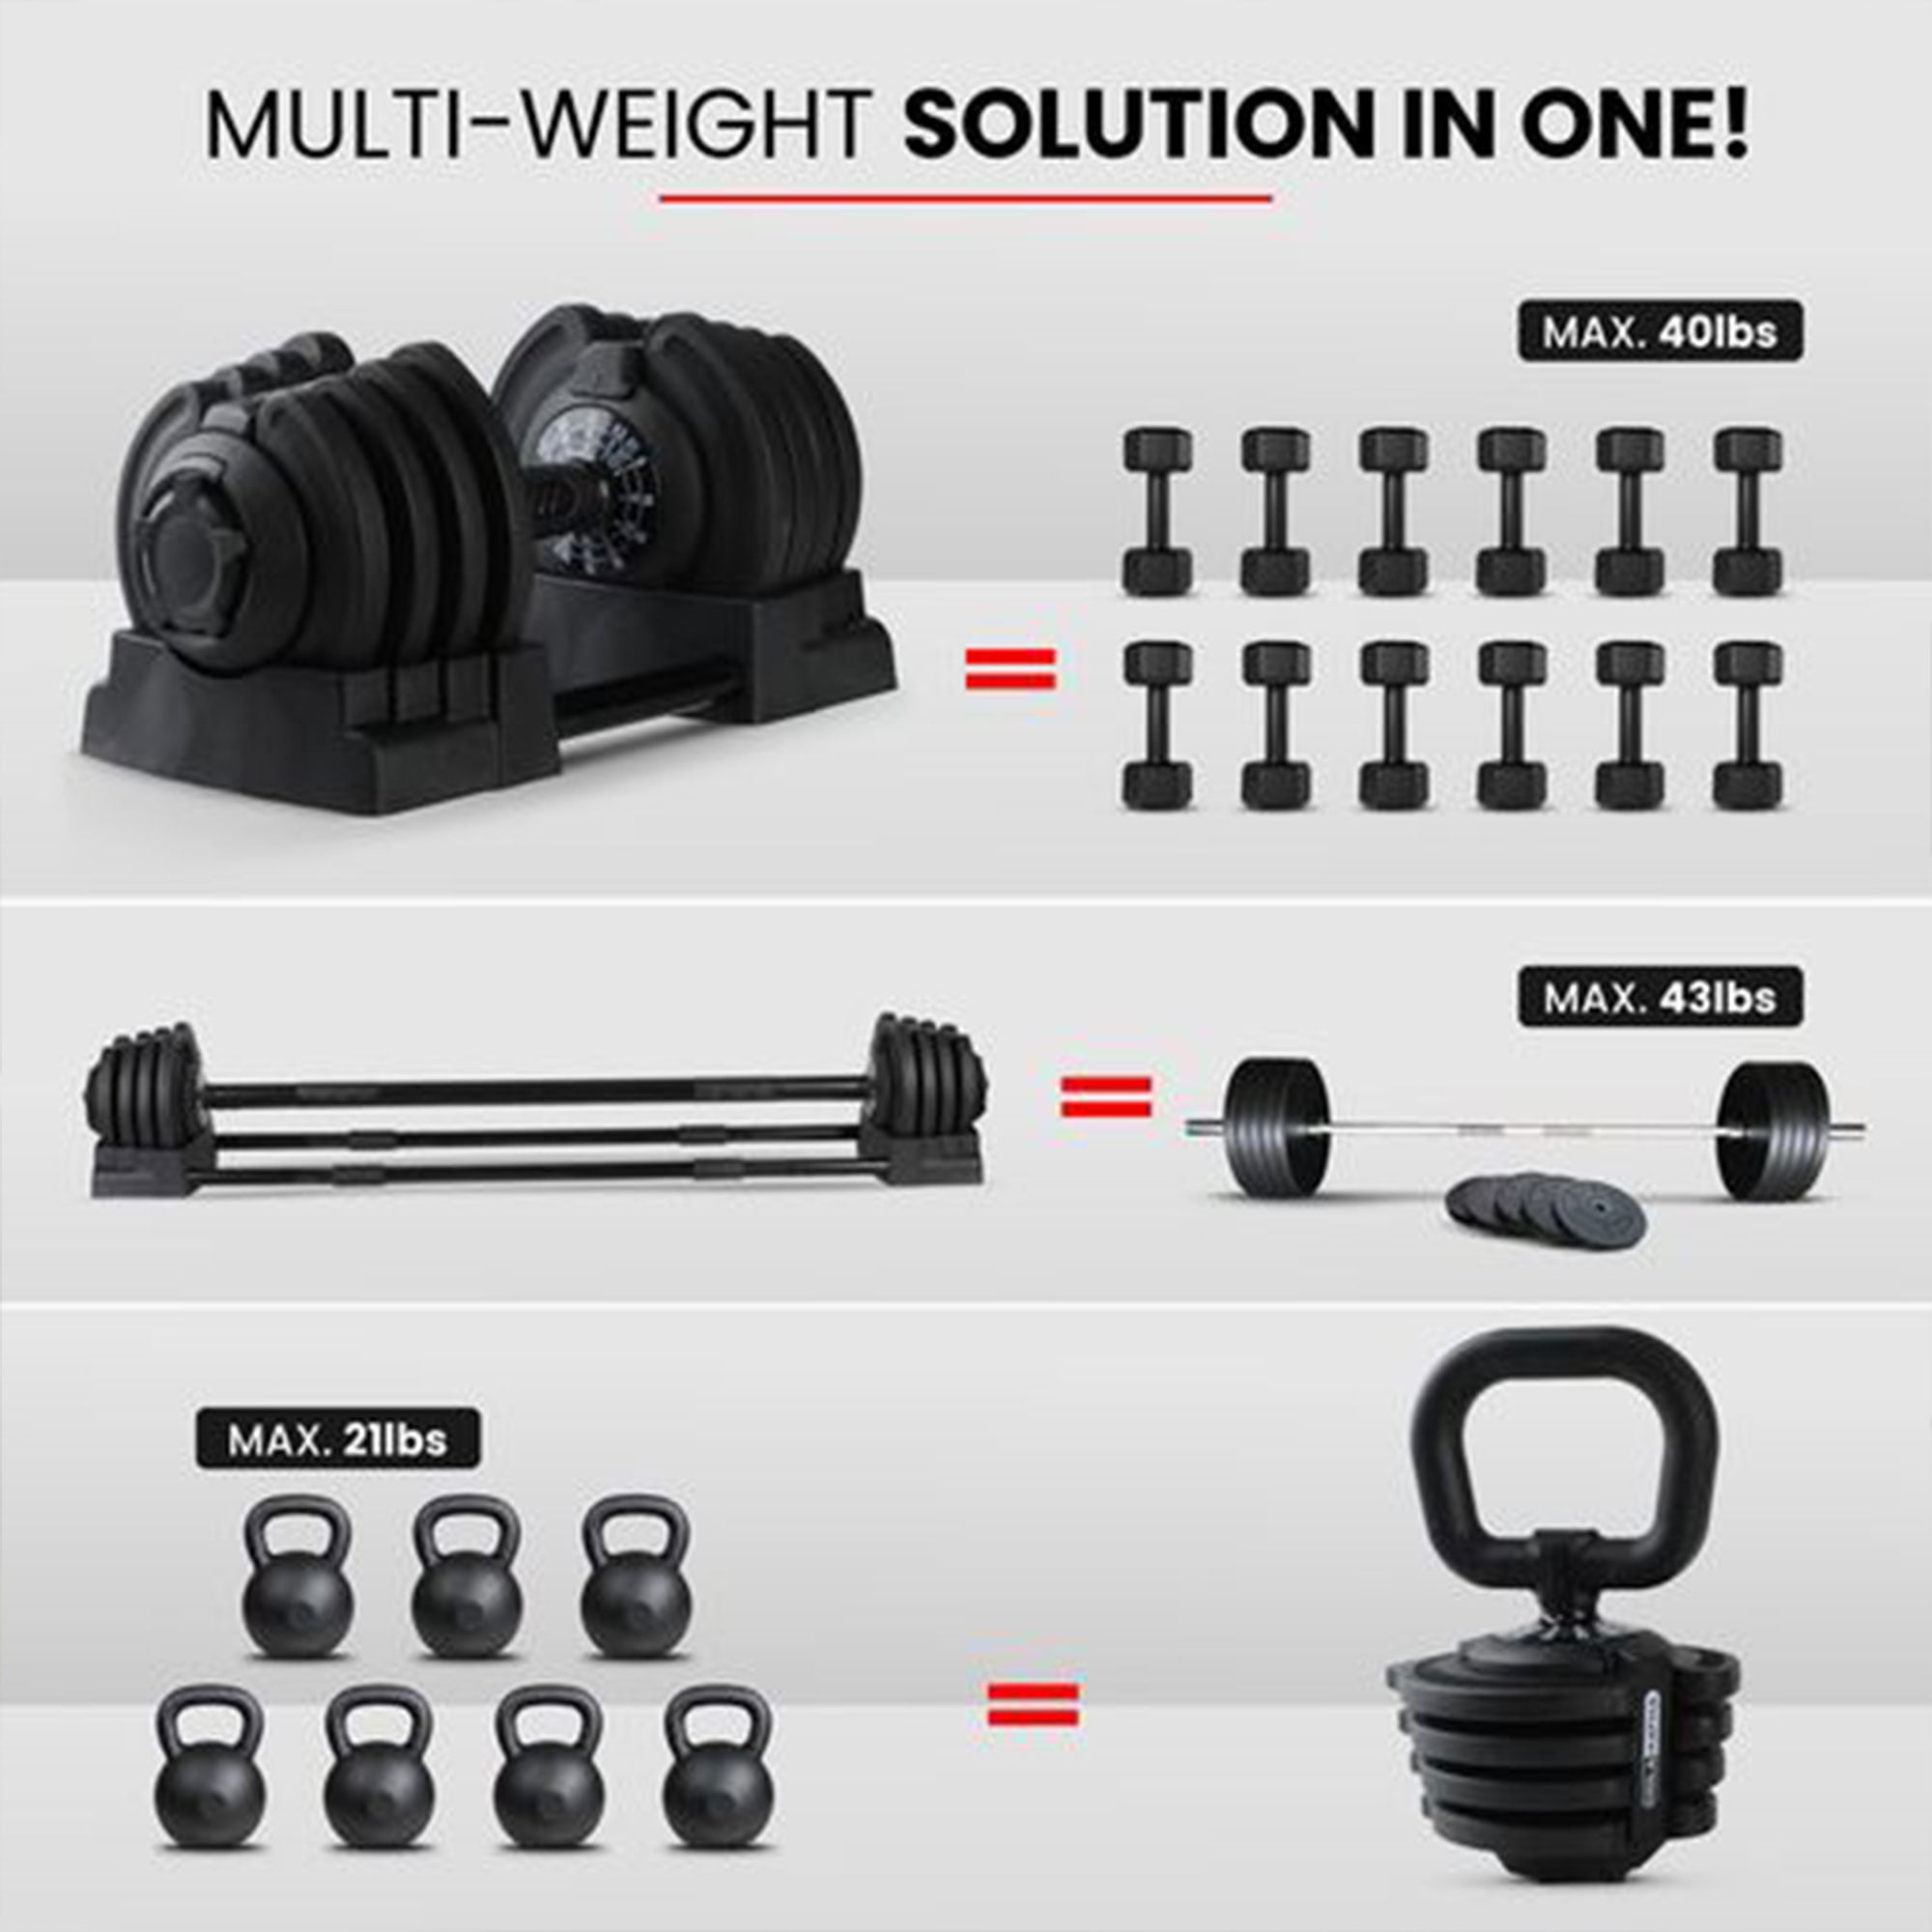 Open Box HolaHatha 3-in-1 Home Gym Workout Dumbbell Set Equipment, Black